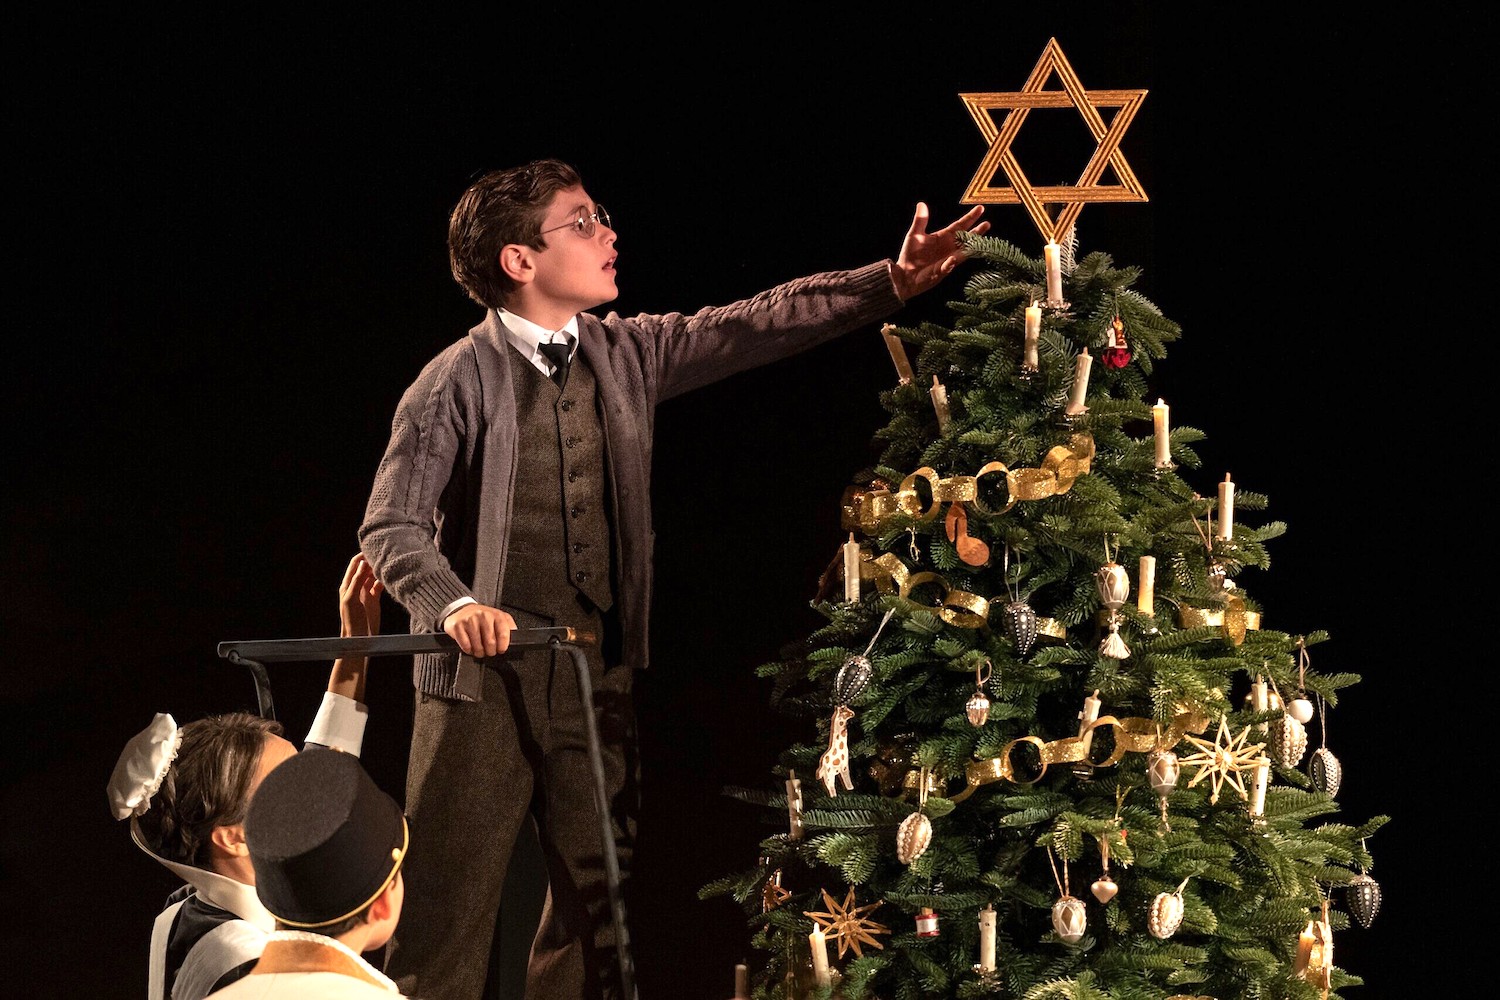 Noting a failed escape from history for assimilated Jews; Stoppard’s play reveals lost heritage